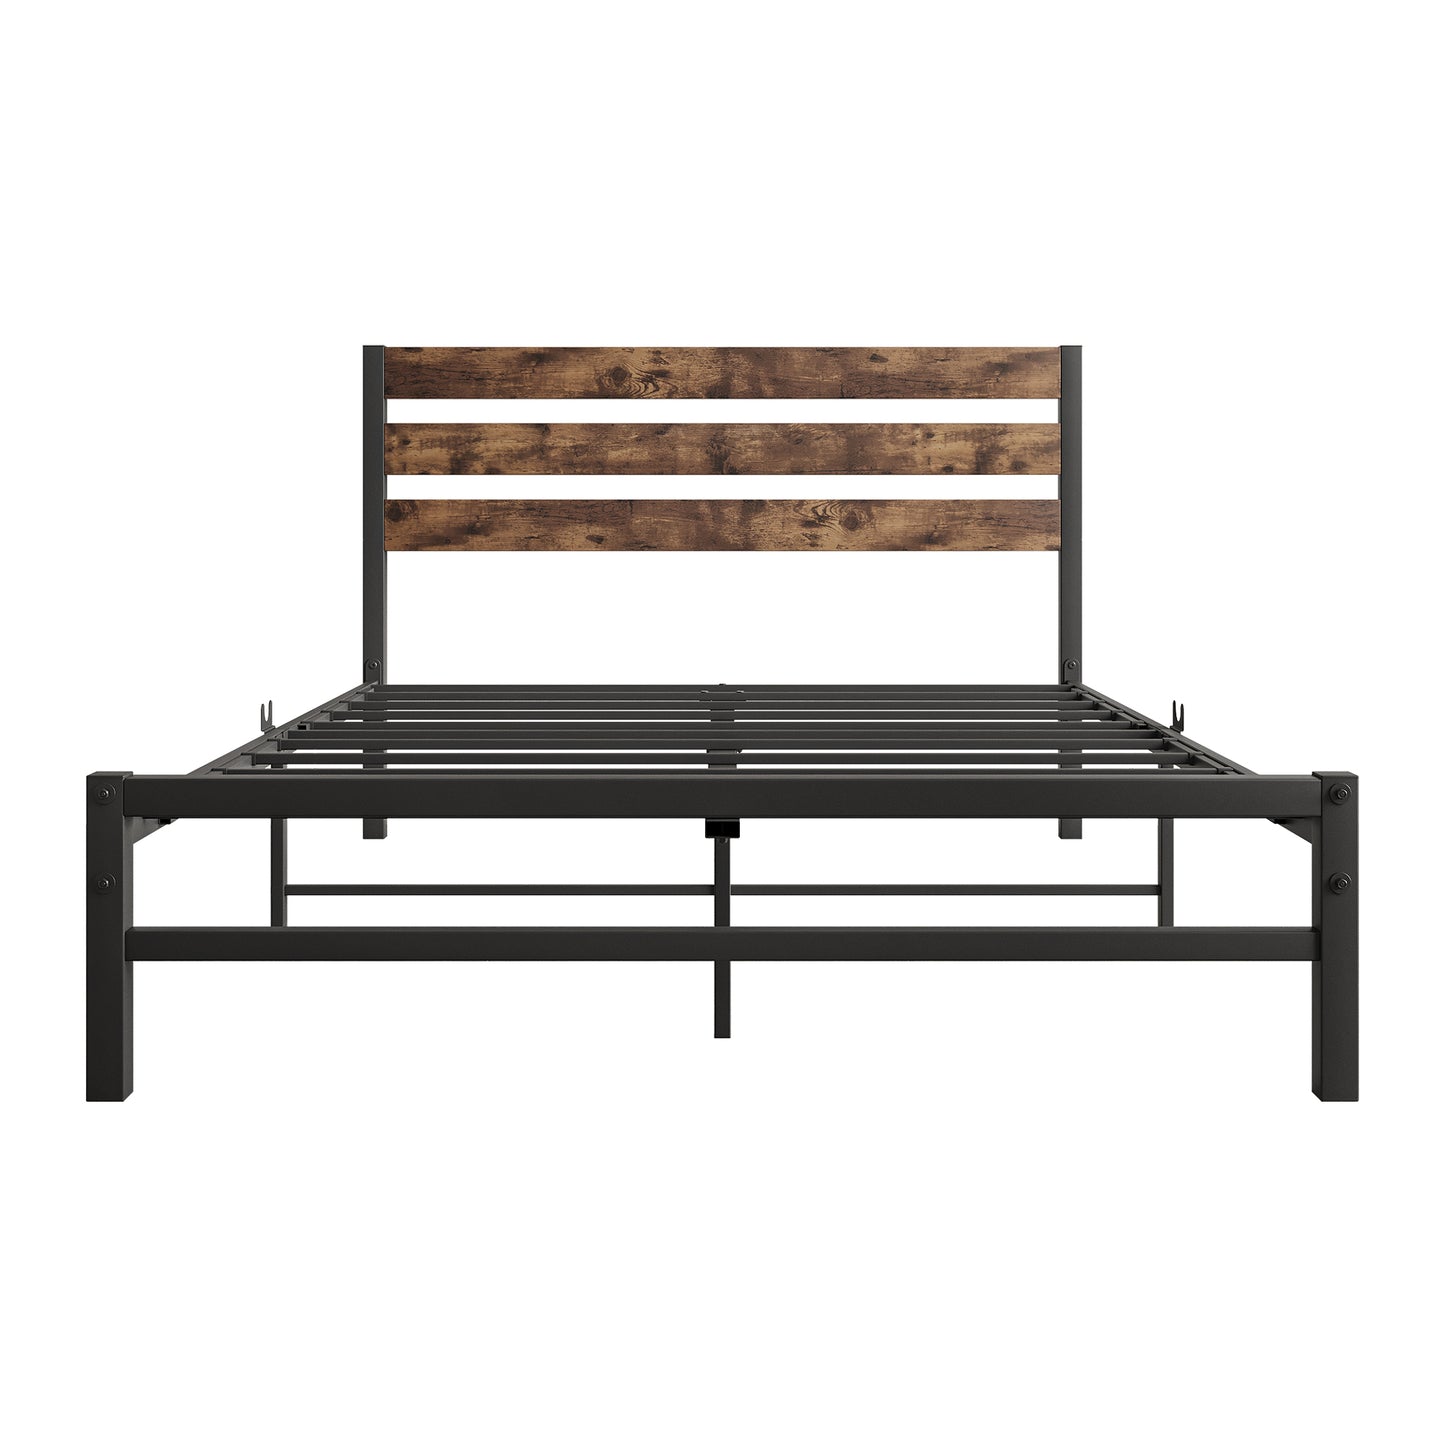 SYNGAR Full Size Bed Frame with Strong Metal Slats, Iron Platform Bed Frame with Rustic Wooden Headboard, Mattress Foundation with 400LBS Load Capacity, Noise Free, No Box Spring Needed, Black